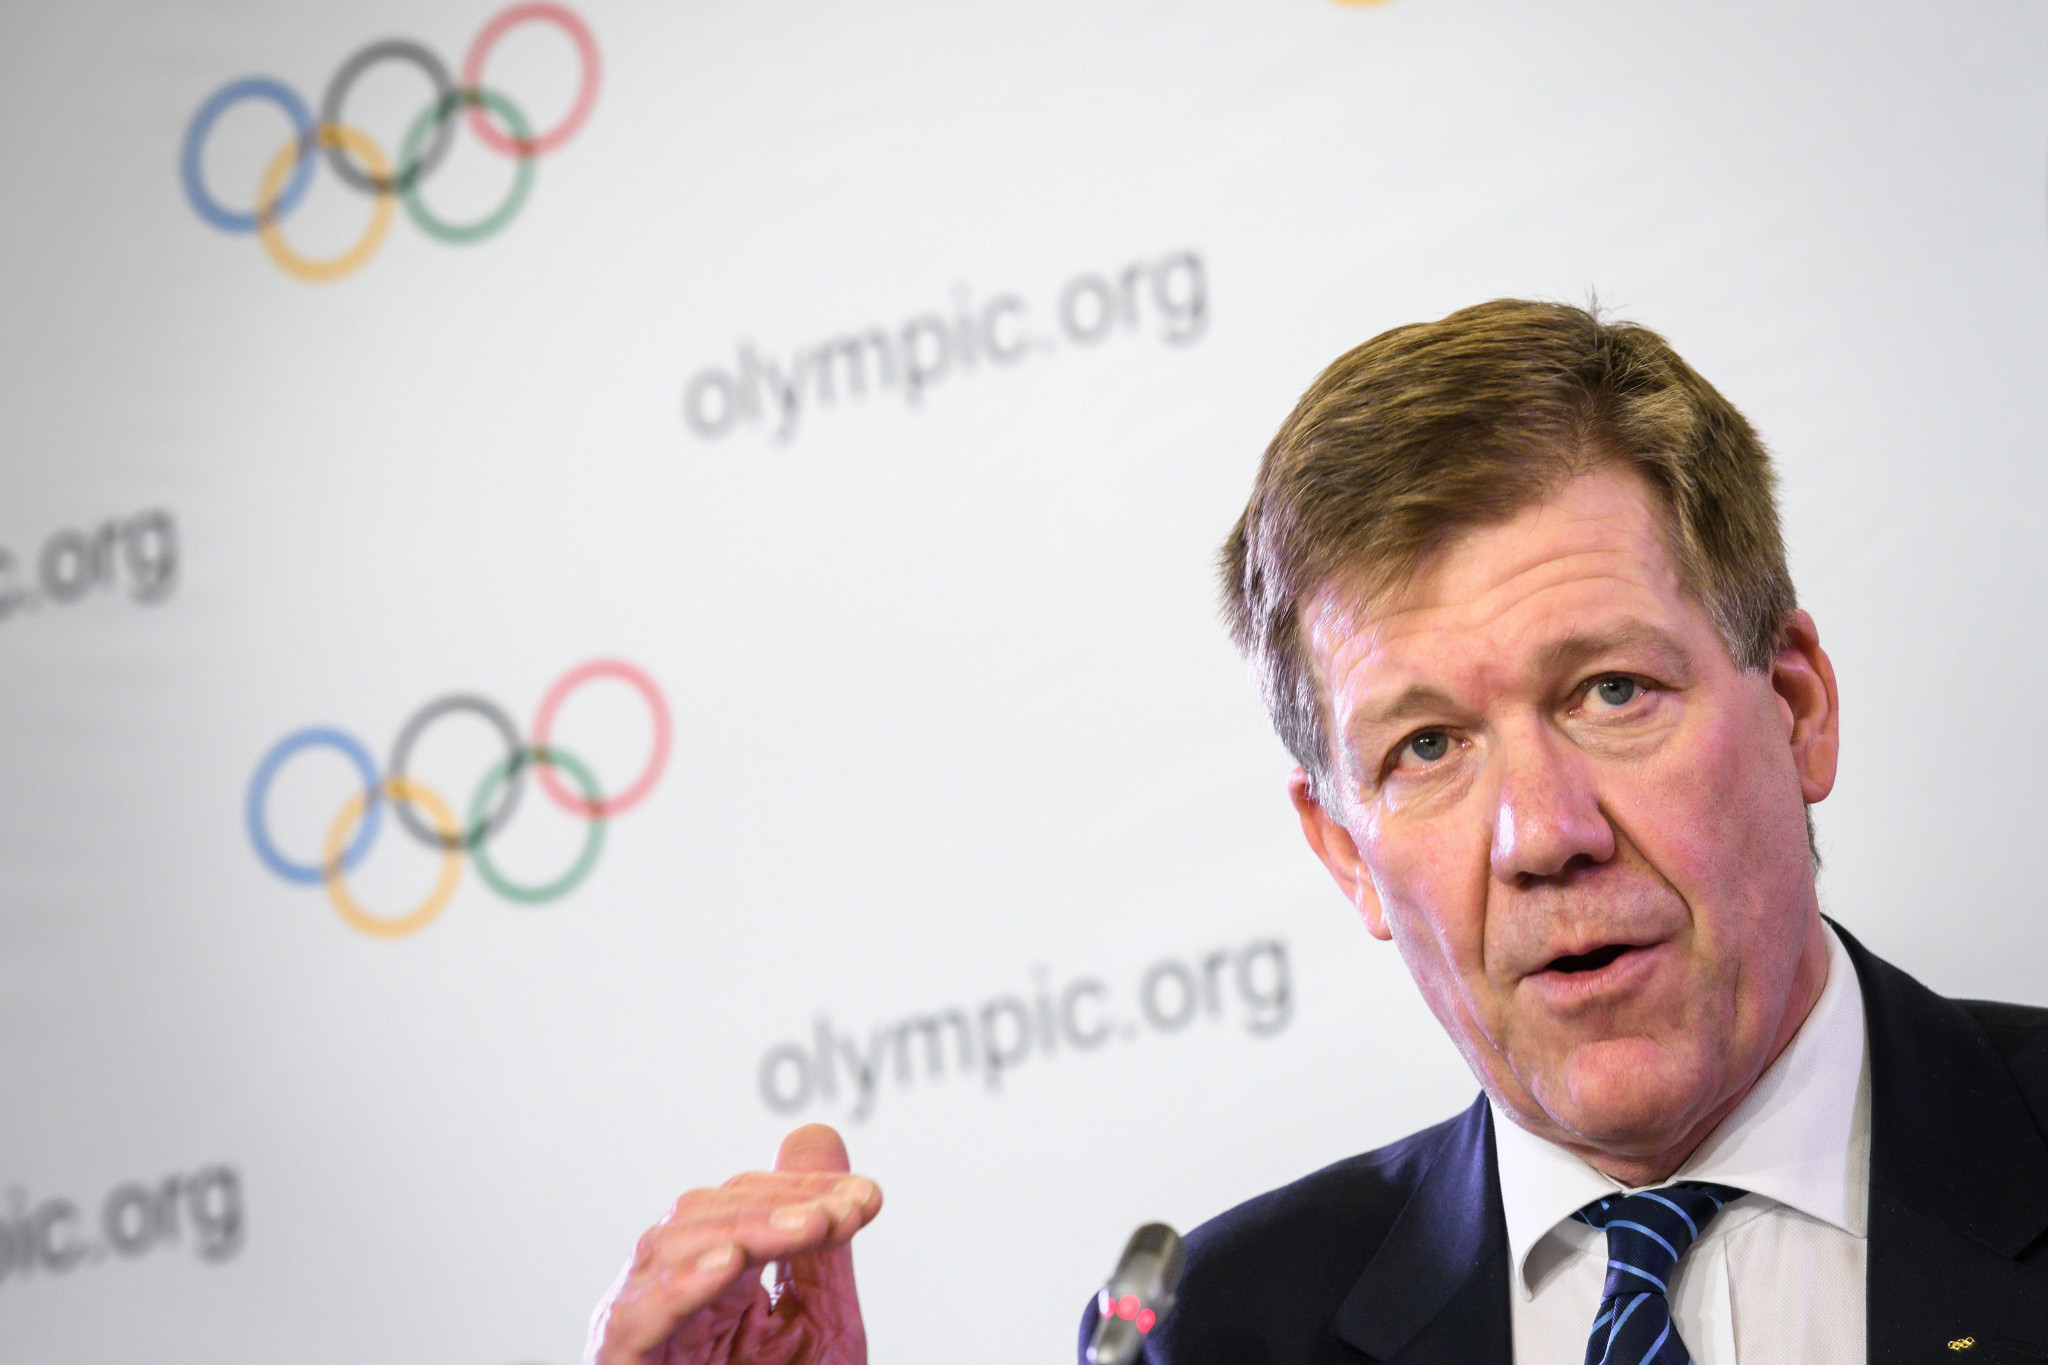 The IOC's medical and scientific director Richard Budgett admitted in July that its current guidelines are no longer fit for purpose, but an update has been delayed until after Beijing 2022 ©Getty Images